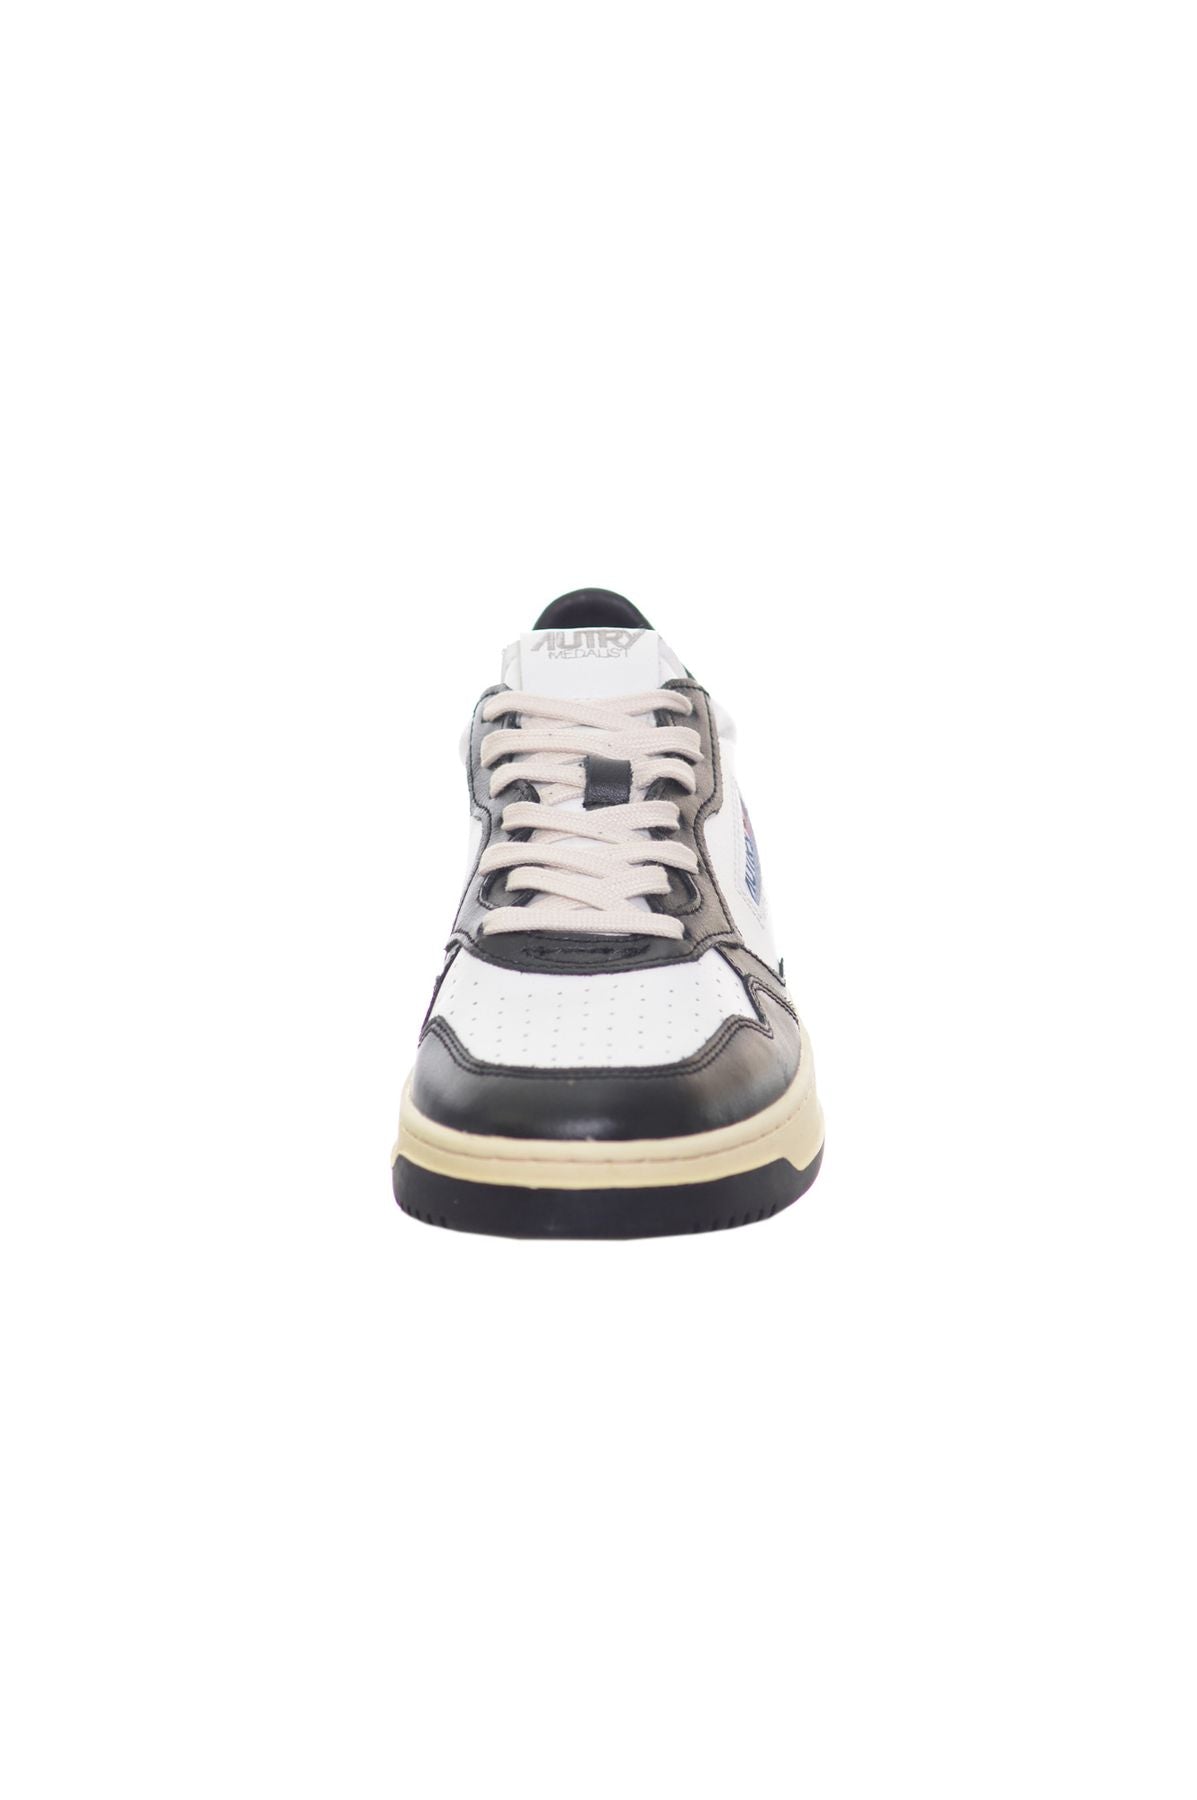 AUTRY Sneakers Autunno/Inverno Pelle